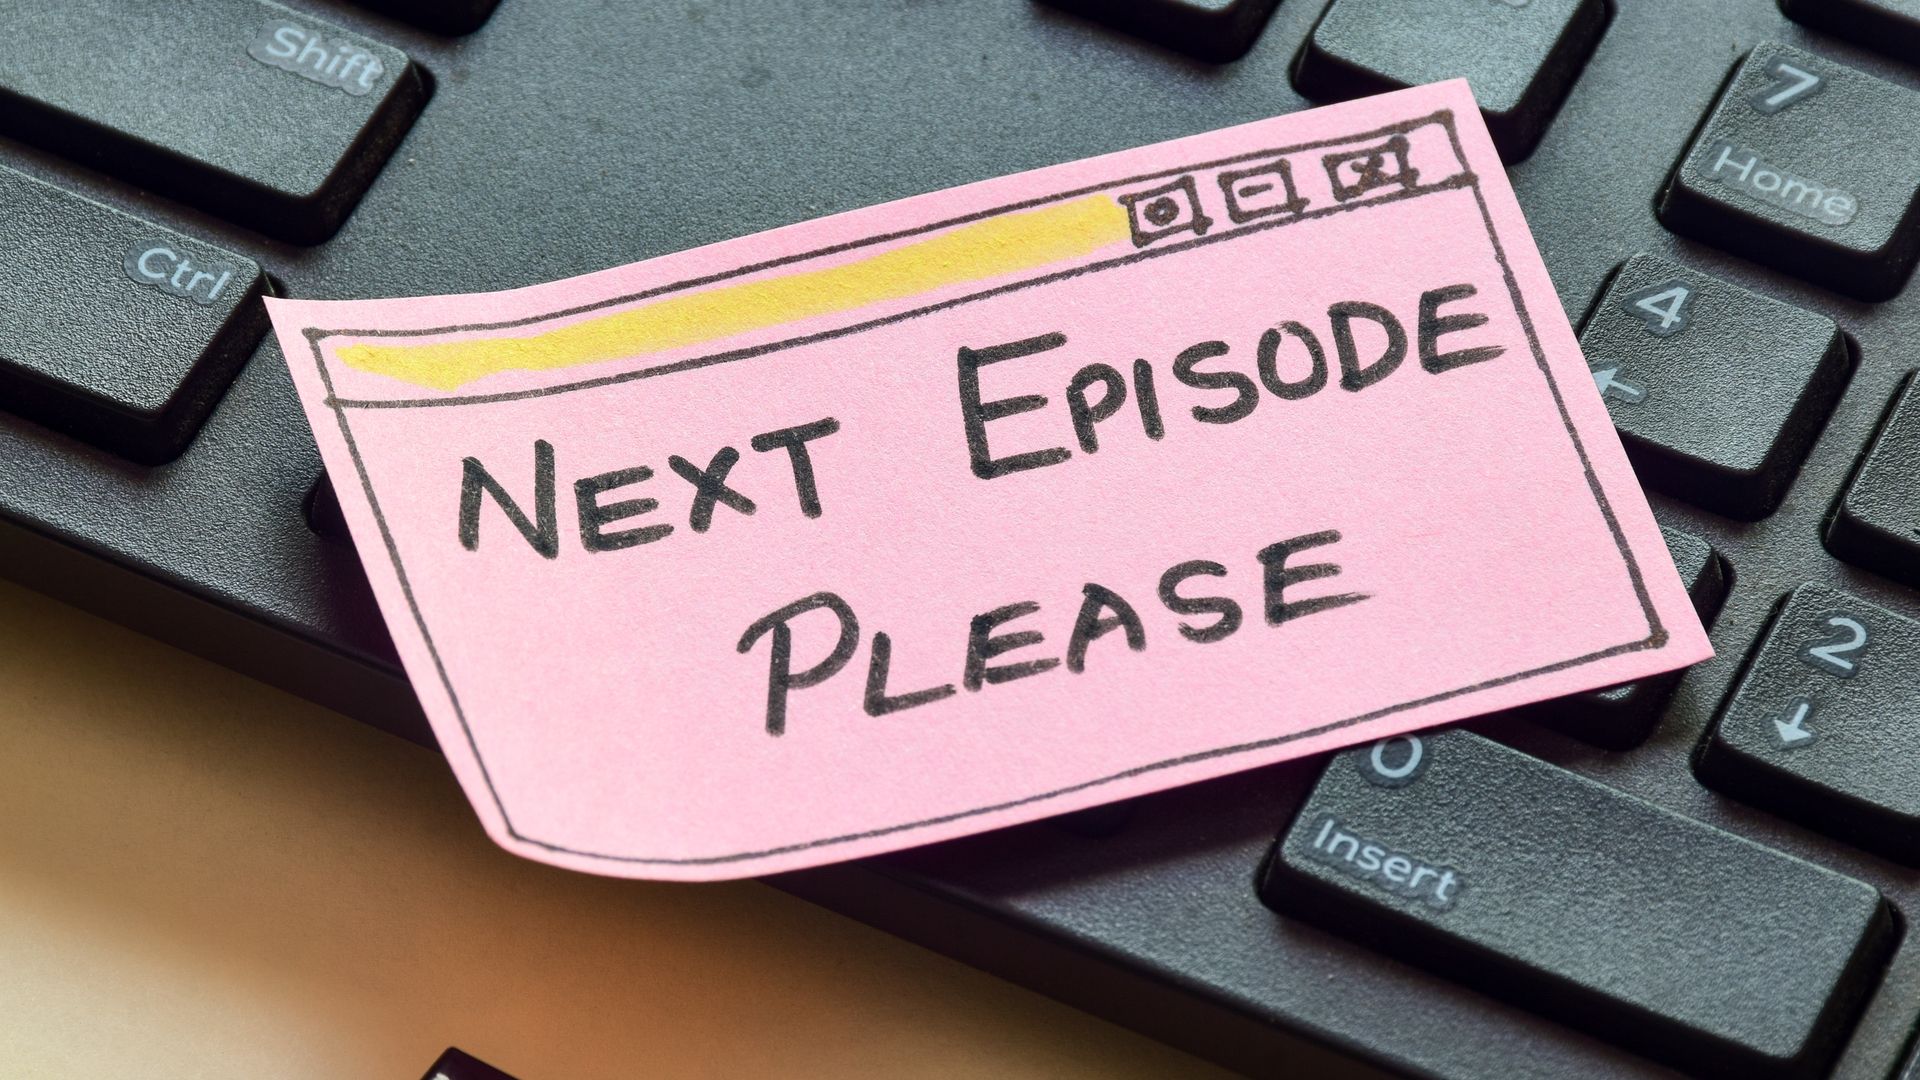 Handwritten note &quot;Next Episode Please&quot; in hand drawn web browser on keyboard.